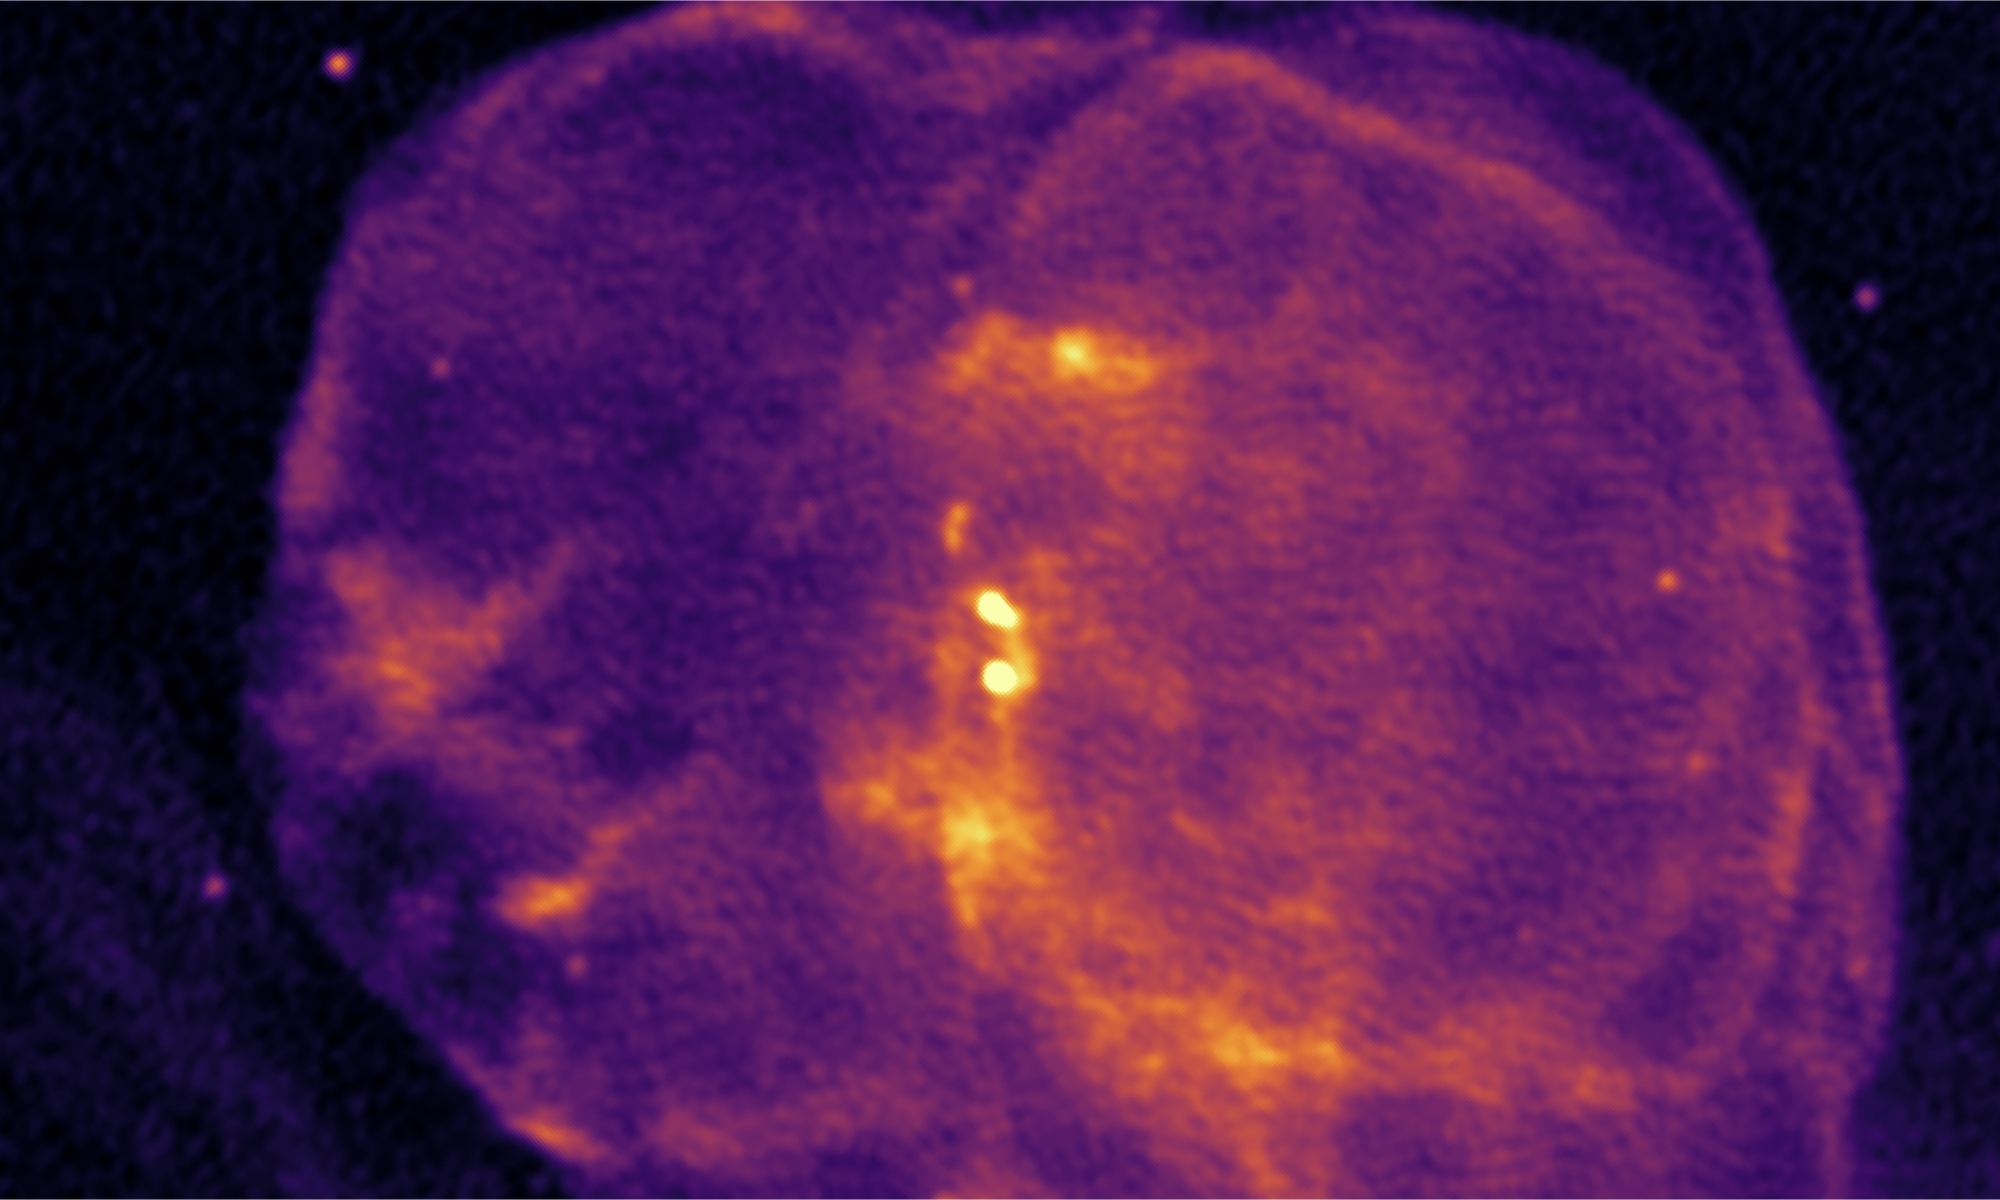 Radio image from the MeerKAT telescope showing Circinus X-1 in the center, within the spherical remnant of the supernova it was born in. The shock waves caaued by the jets are seen above and below Cir X-1, and the S-shape structure in the jets is somewhat obscured by a bright source in the background. Courtesy Fraser Cowie, Attribution CC BY 4.0.